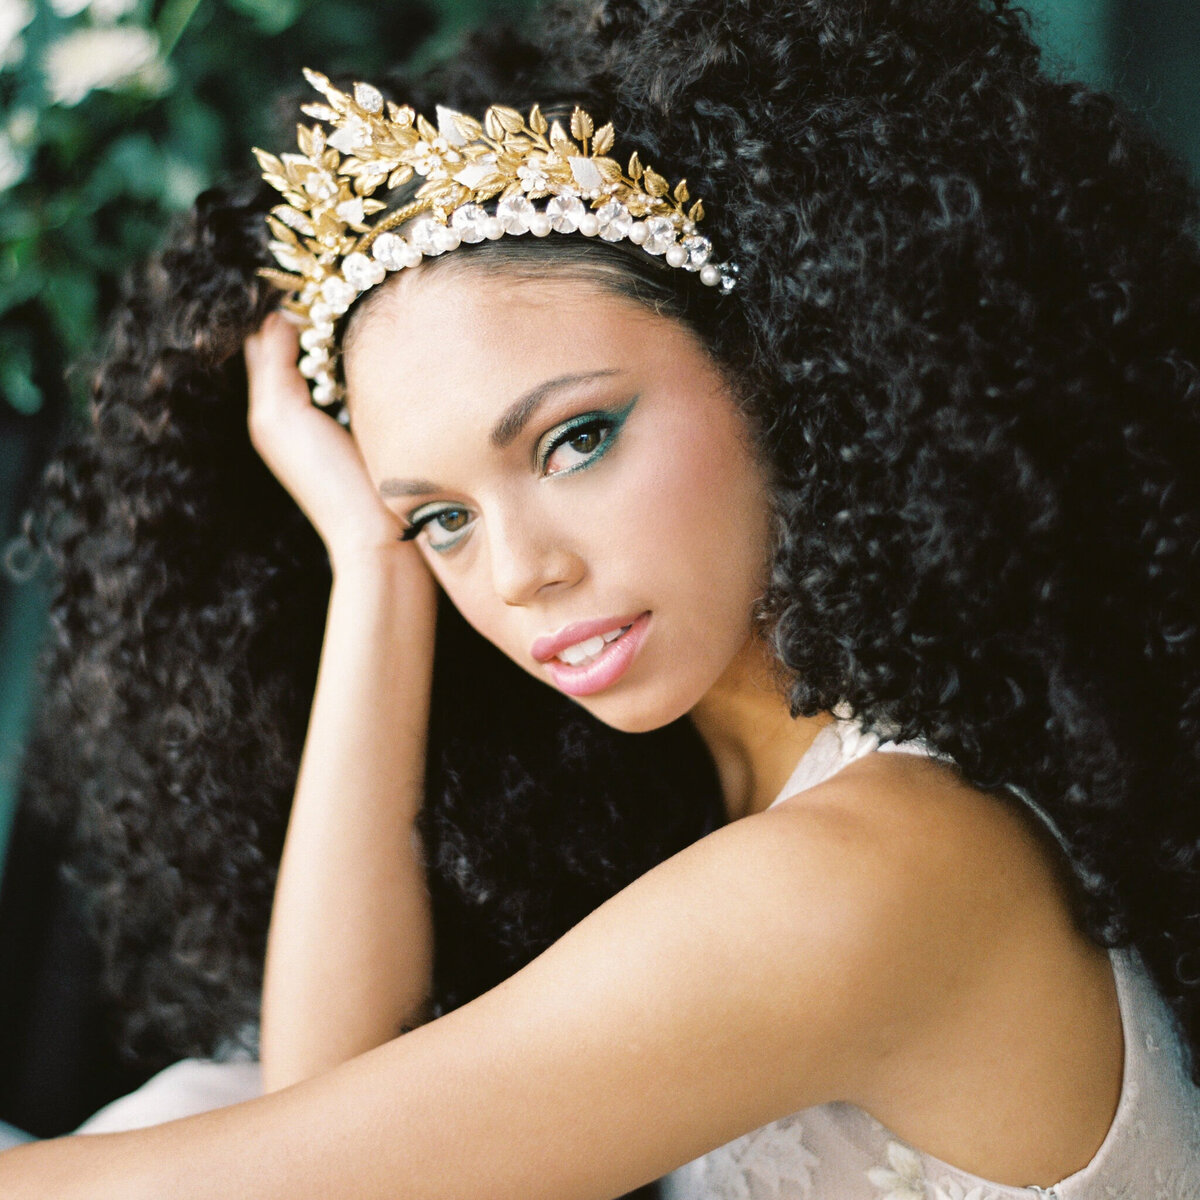 Gorgeous golden floral bridal headpiece and earrings by Blair Nadeau Bridal Adornments, romantic and modern wedding jewelry based in Brampton.  Featured on the Brontë Bride Vendor Guide.